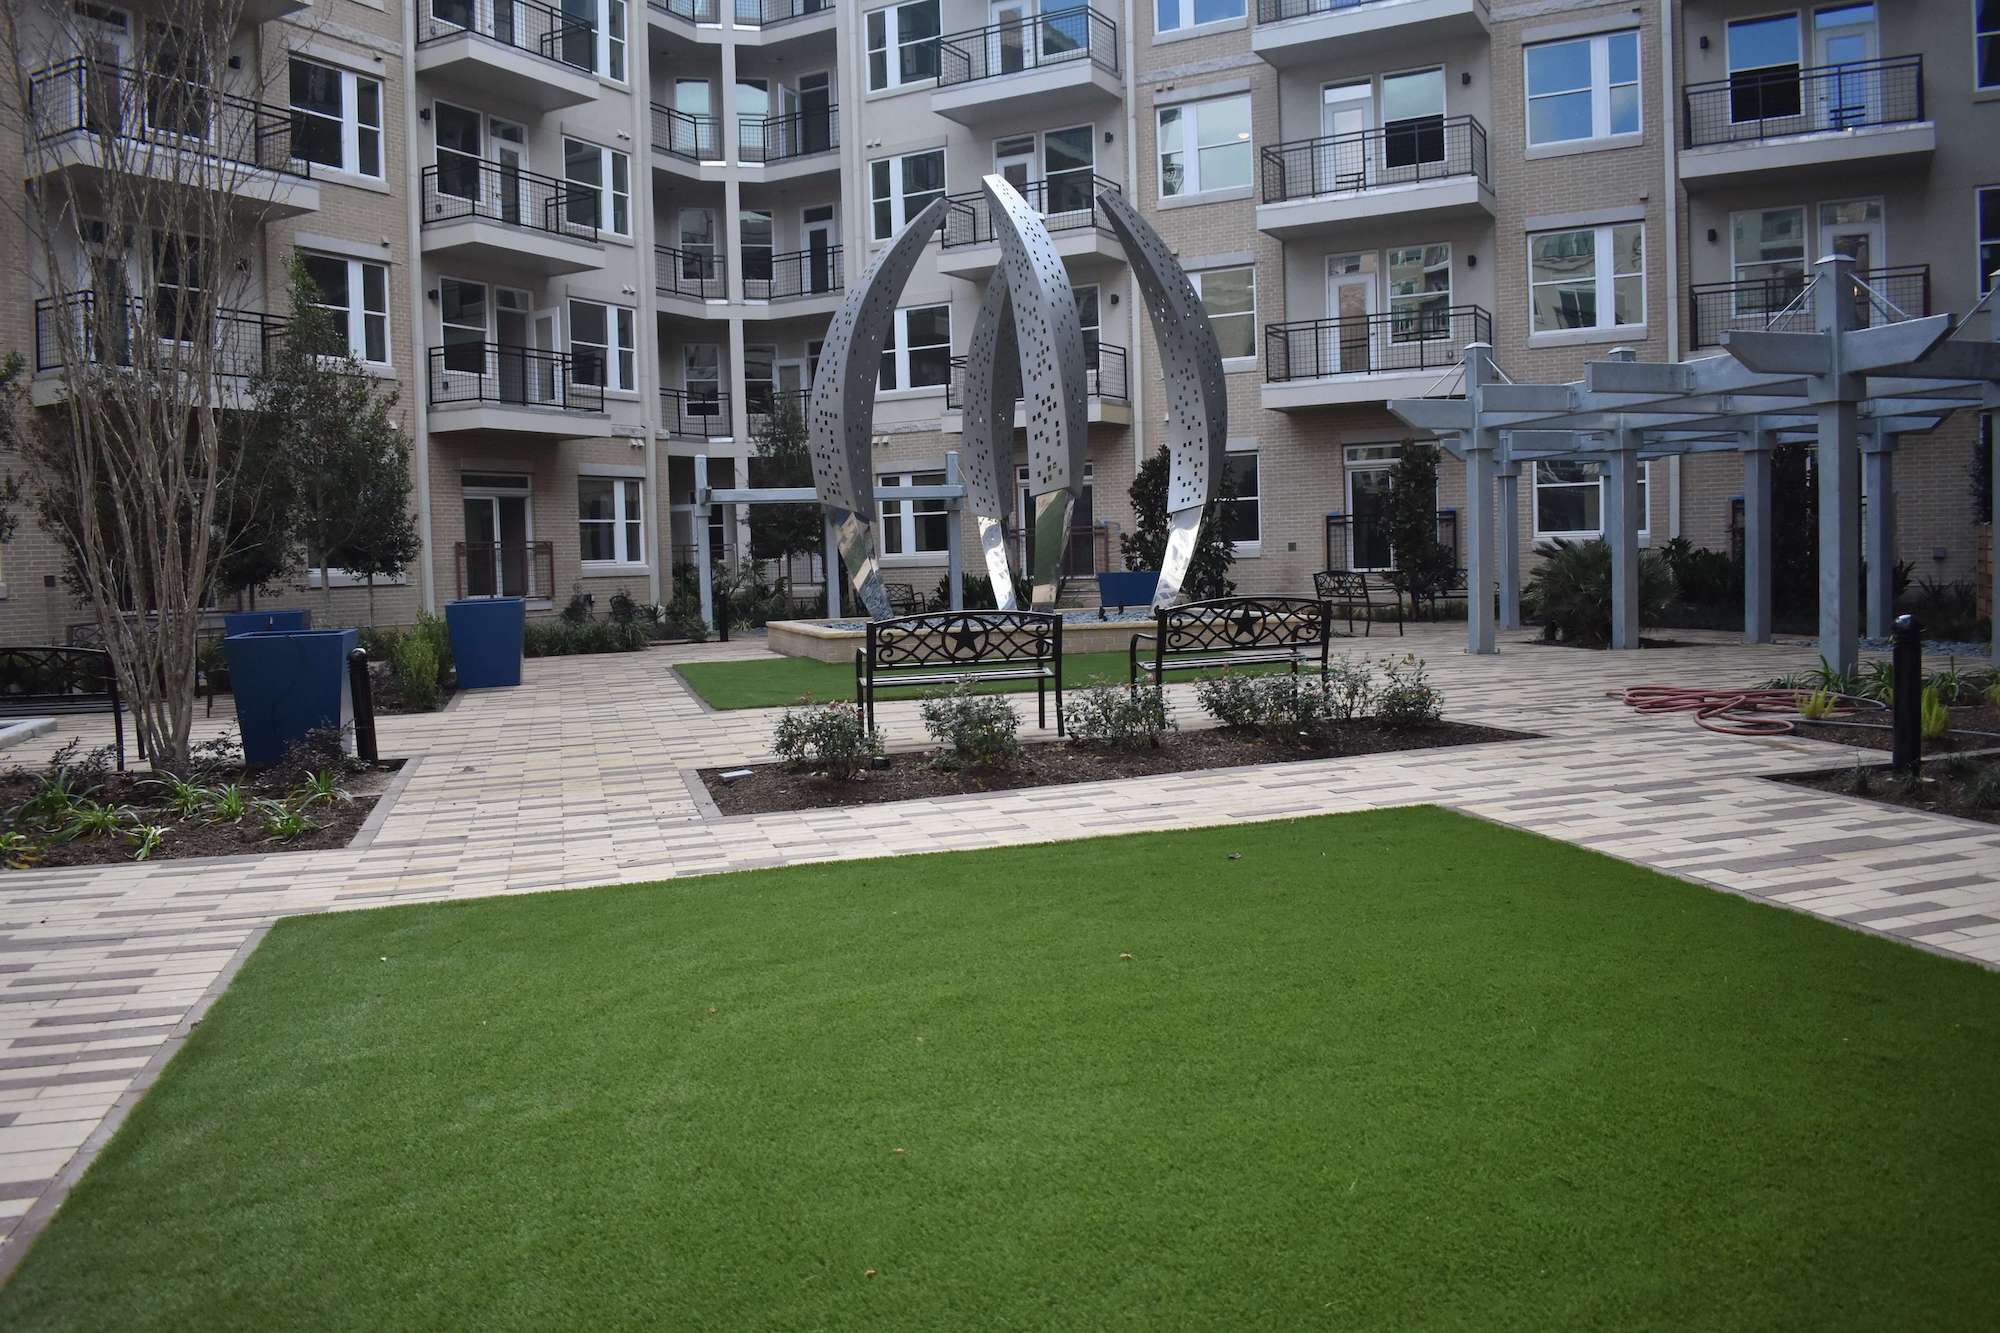 Commercial artificial grass lawn at apartment complex